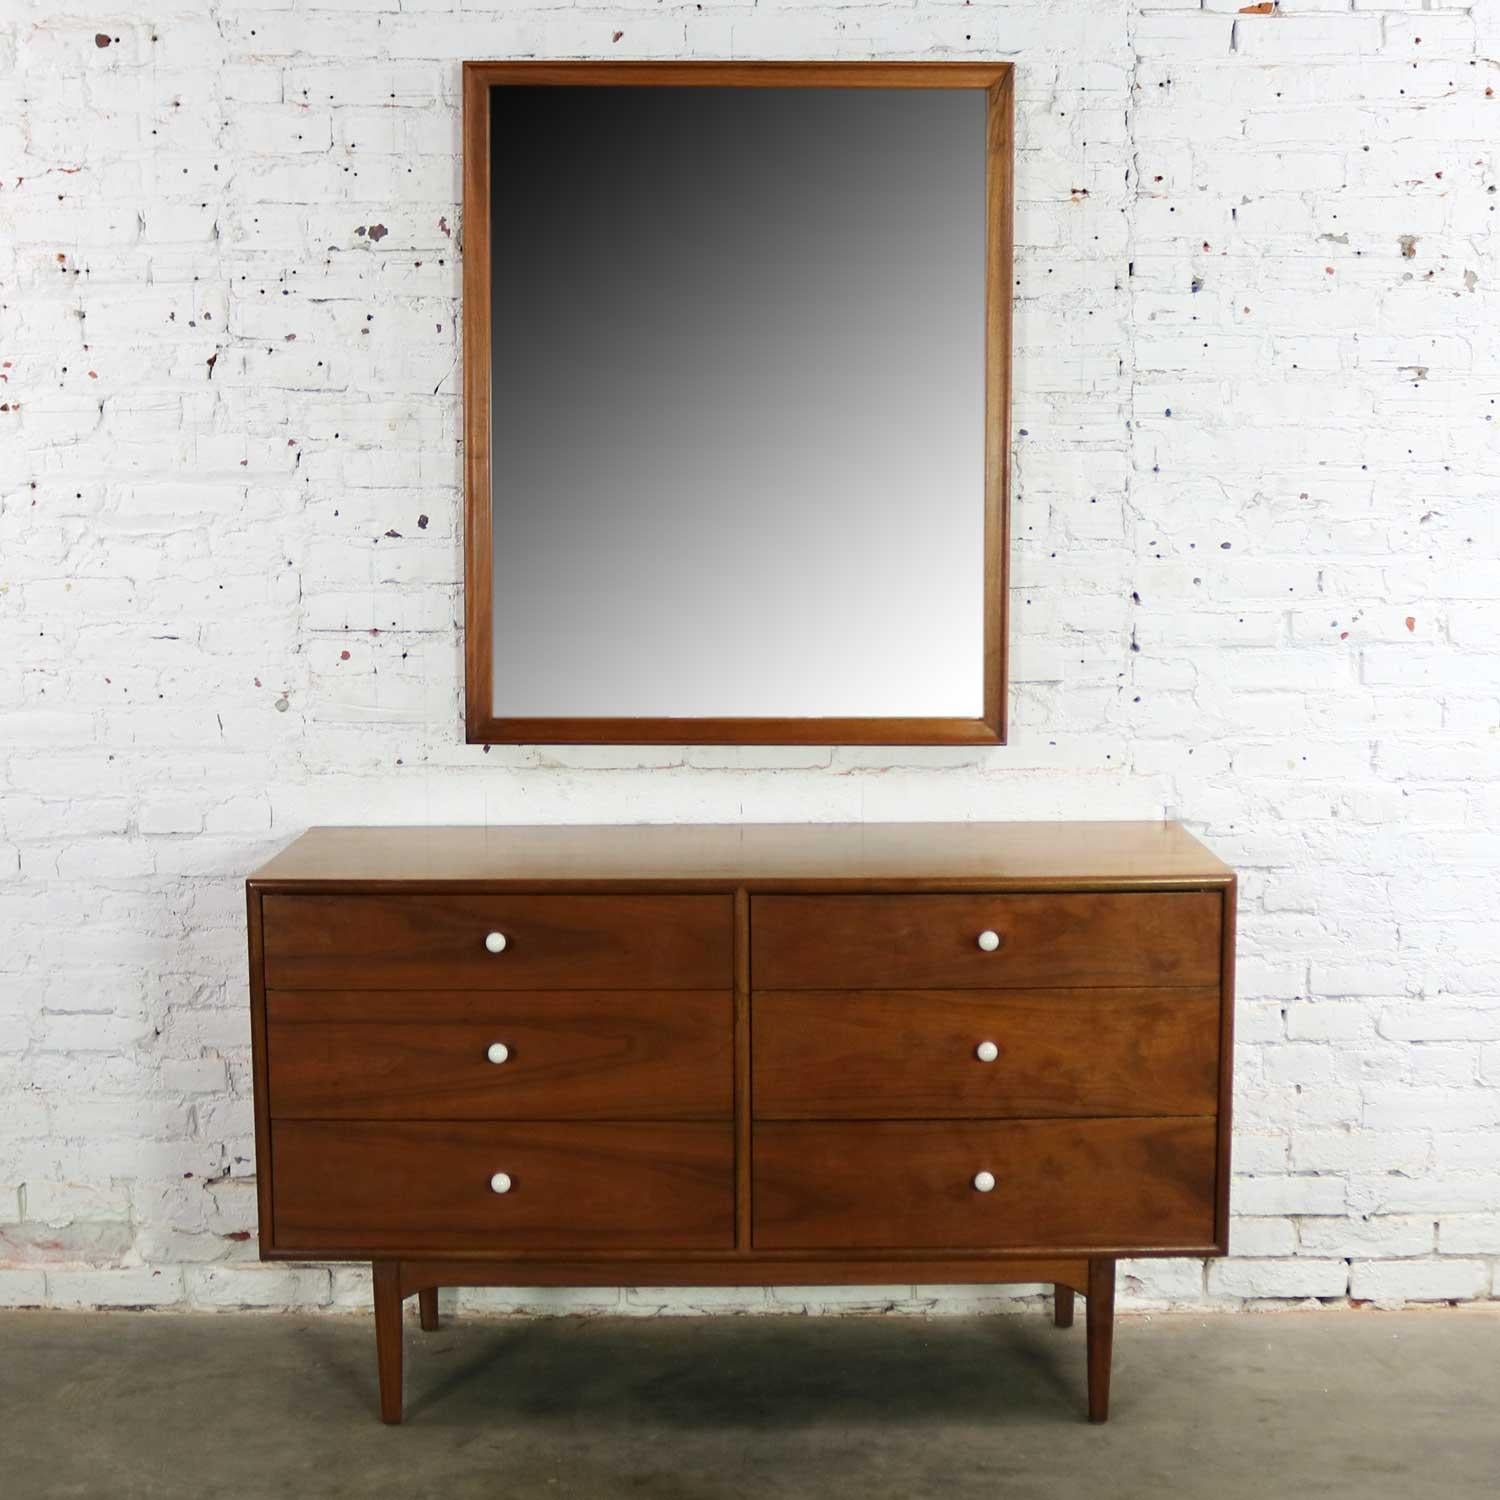 Handsome Mid-Century Modern walnut six-drawer dresser with mirror by Drexel from their Declaration collection designed by Kipp Stewart and Stewart MacDougall. It is in fabulous vintage condition overall. There is normal patina for its age and use.